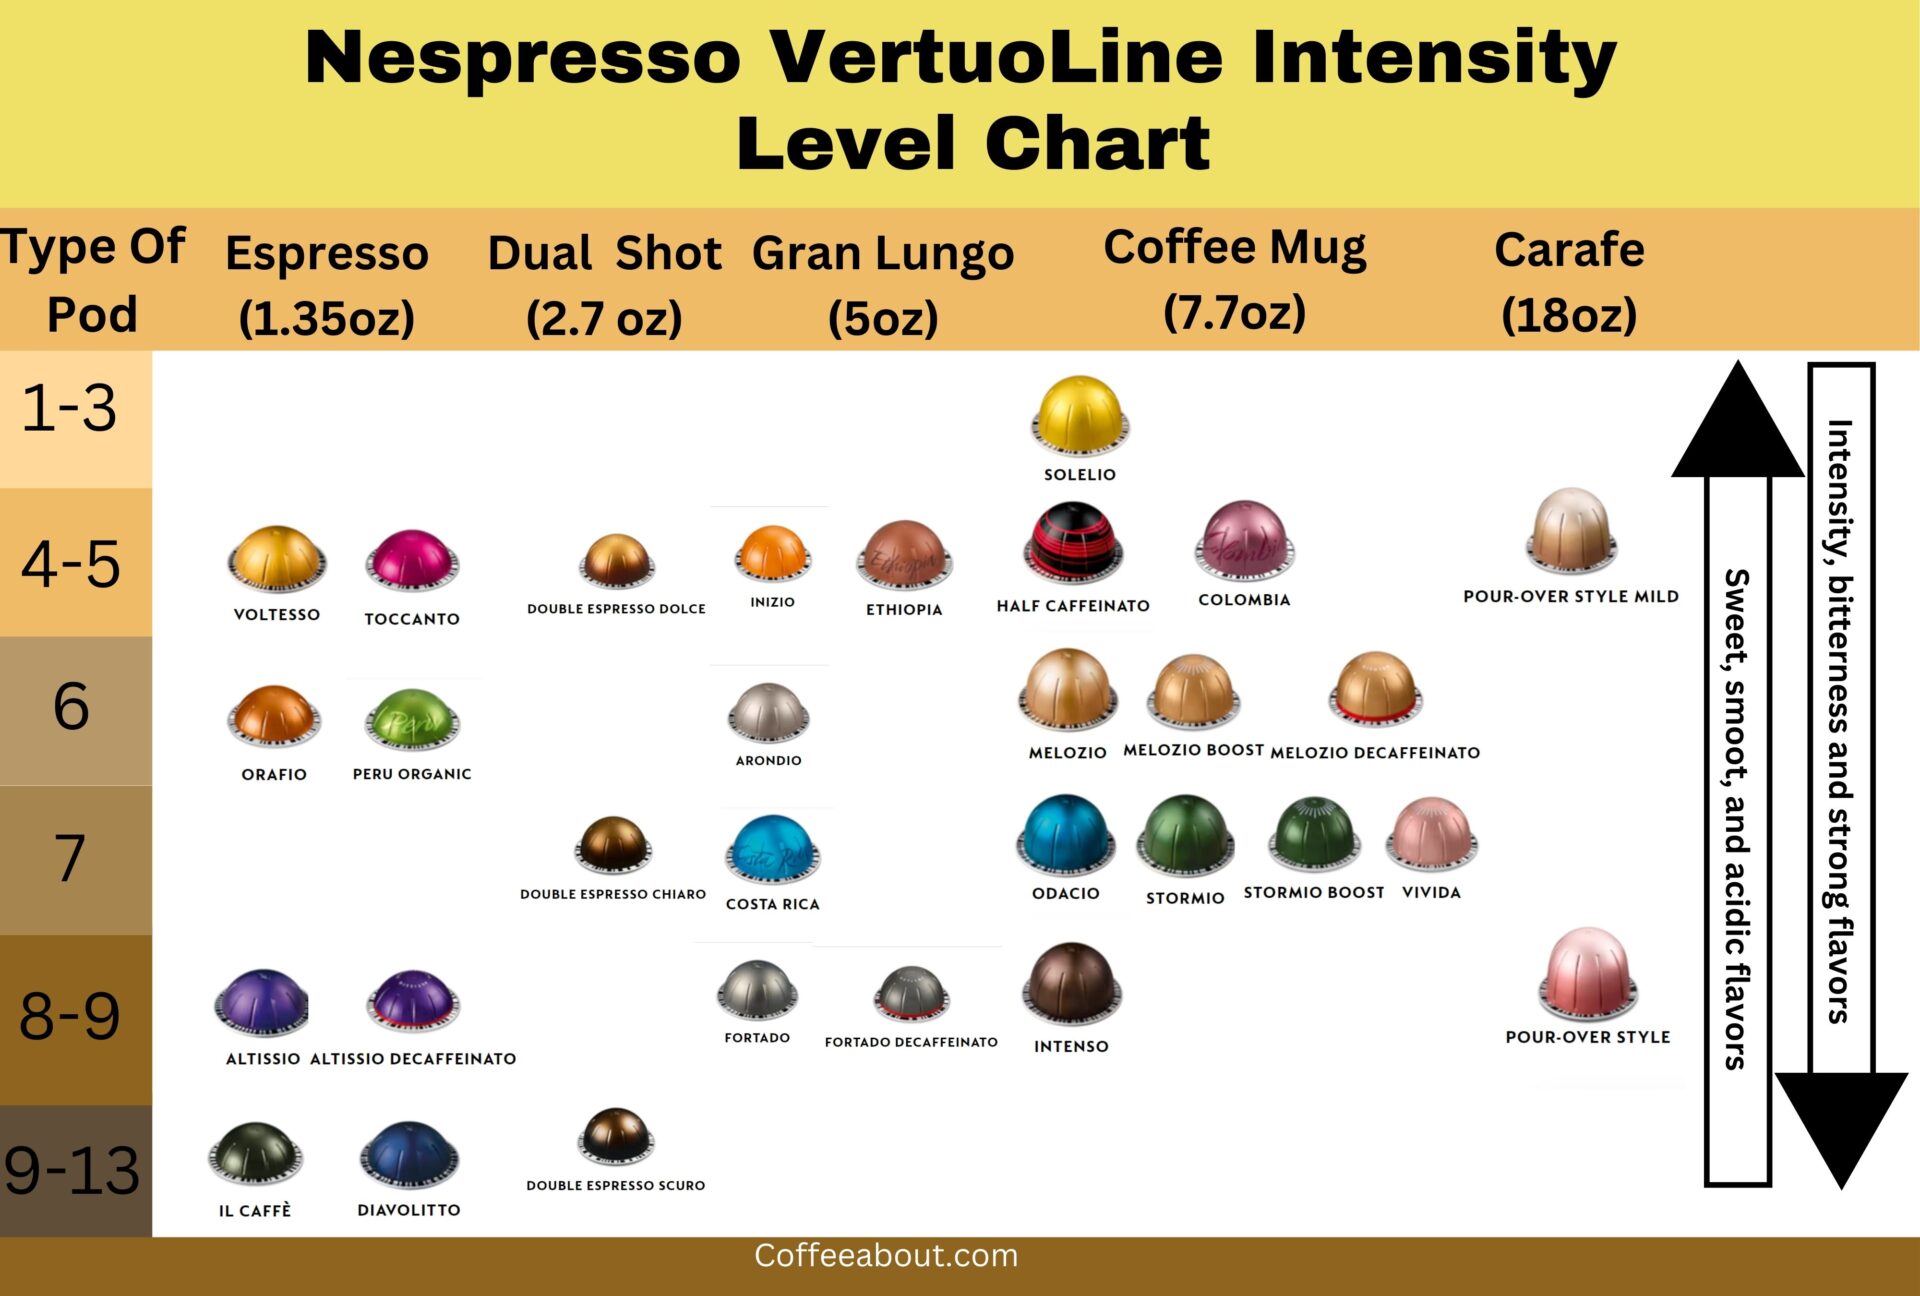 Nespresso Intensity Levels Explained (Flavors Chart!)